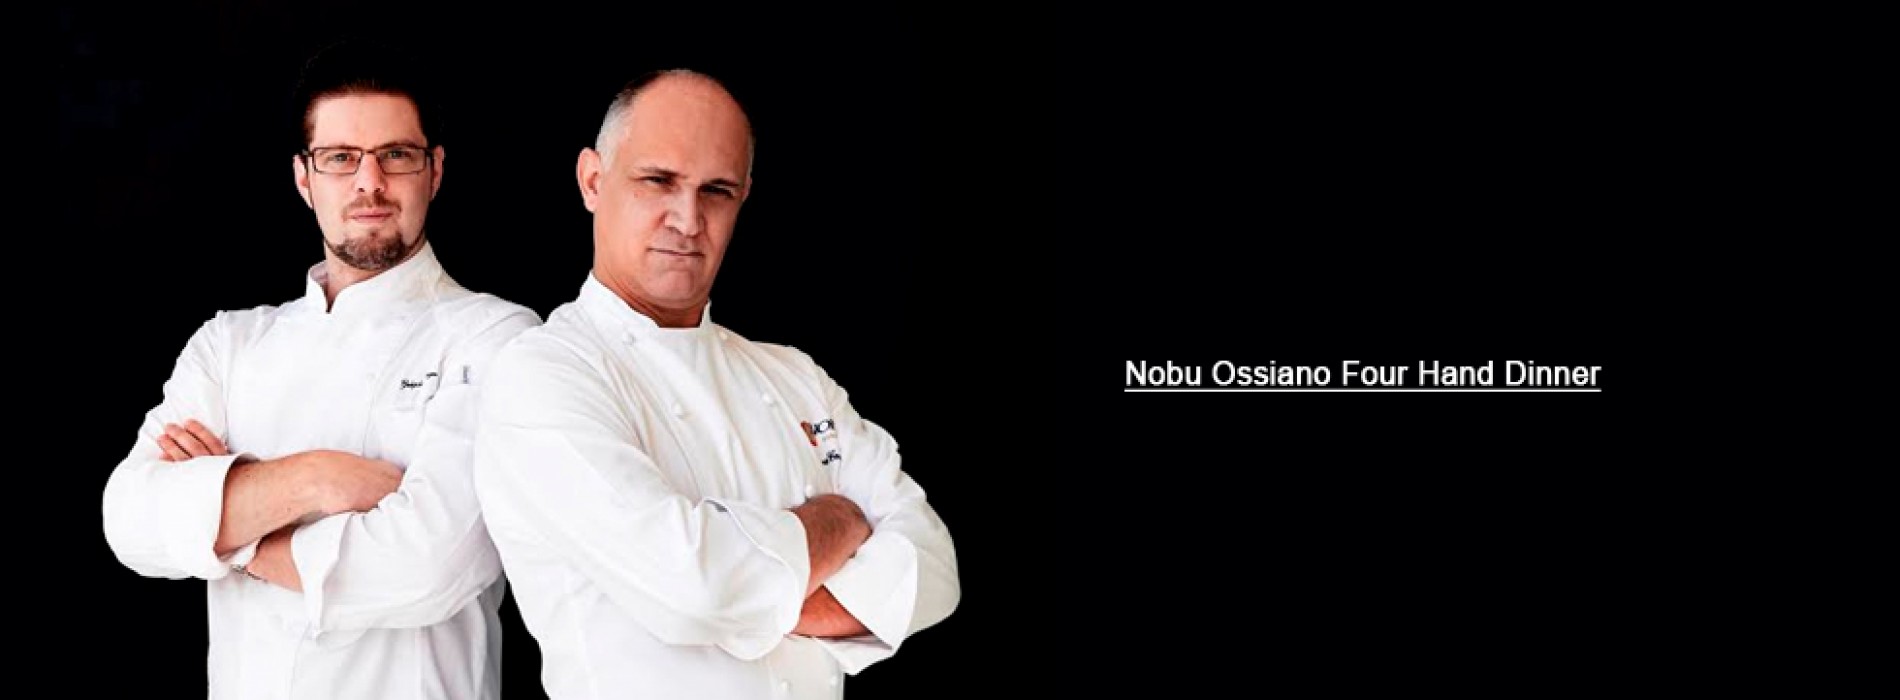 Ossiano joins forces with Nobu for an exclusive ‘Four Hands’ Dining Experience at Atlantis, The Palm